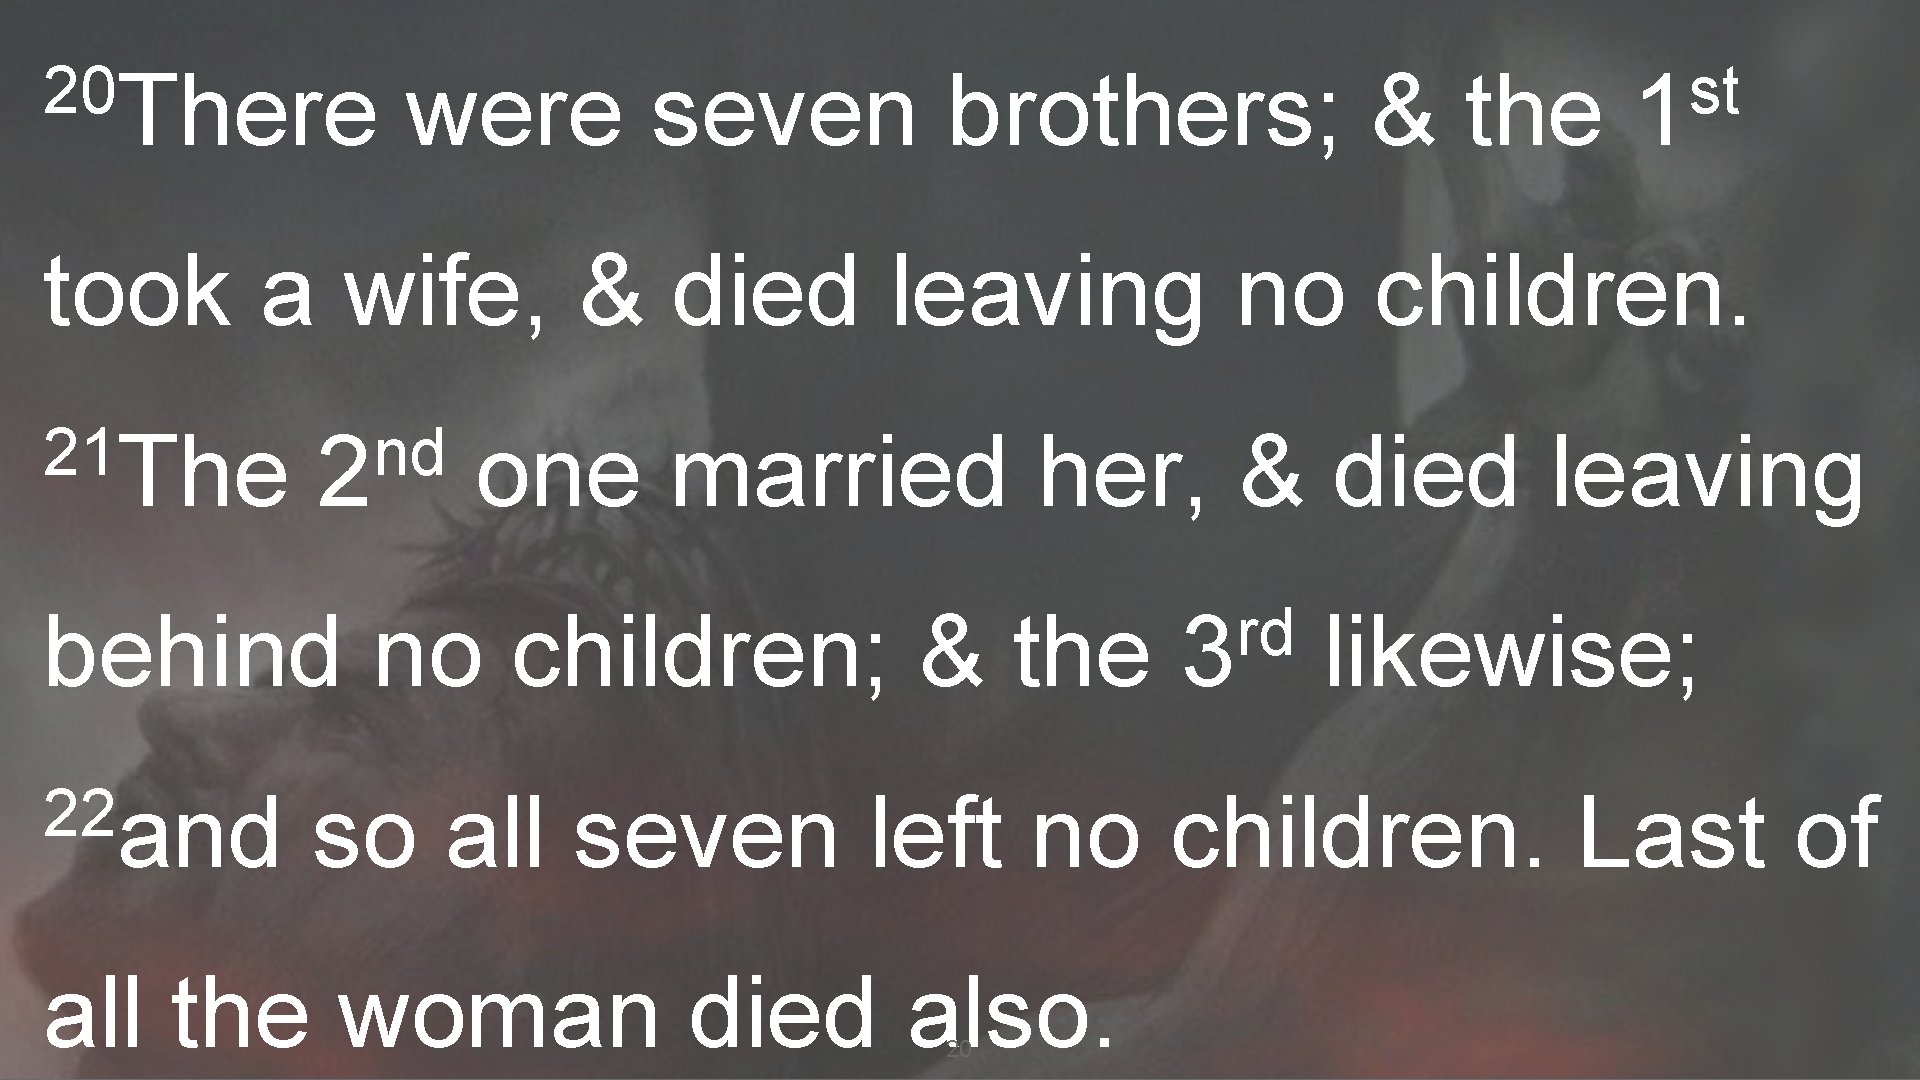 20 There were seven brothers; & the st 1 took a wife, & died